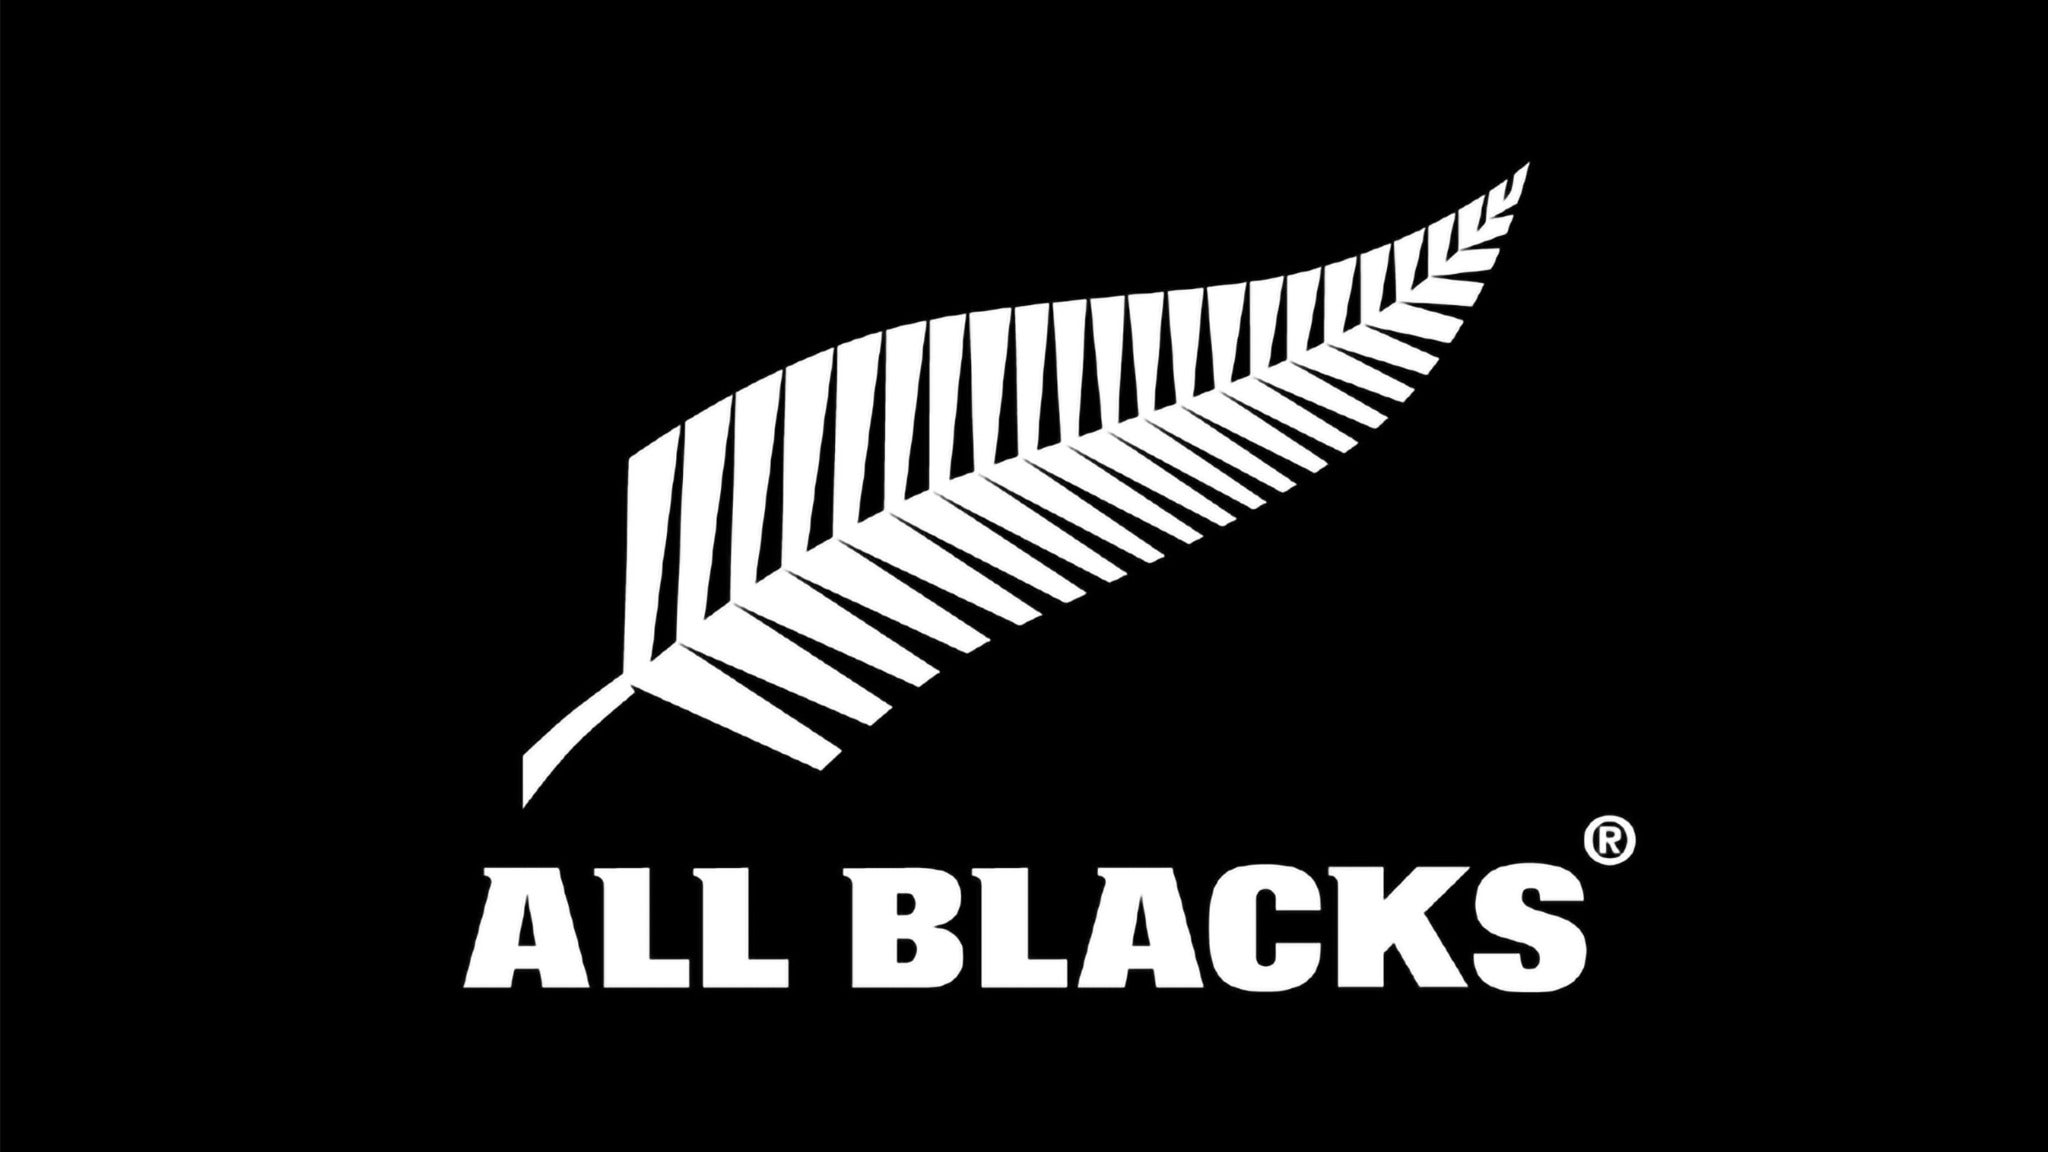 Image used with permission from Ticketmaster | All Blacks v South Africa tickets